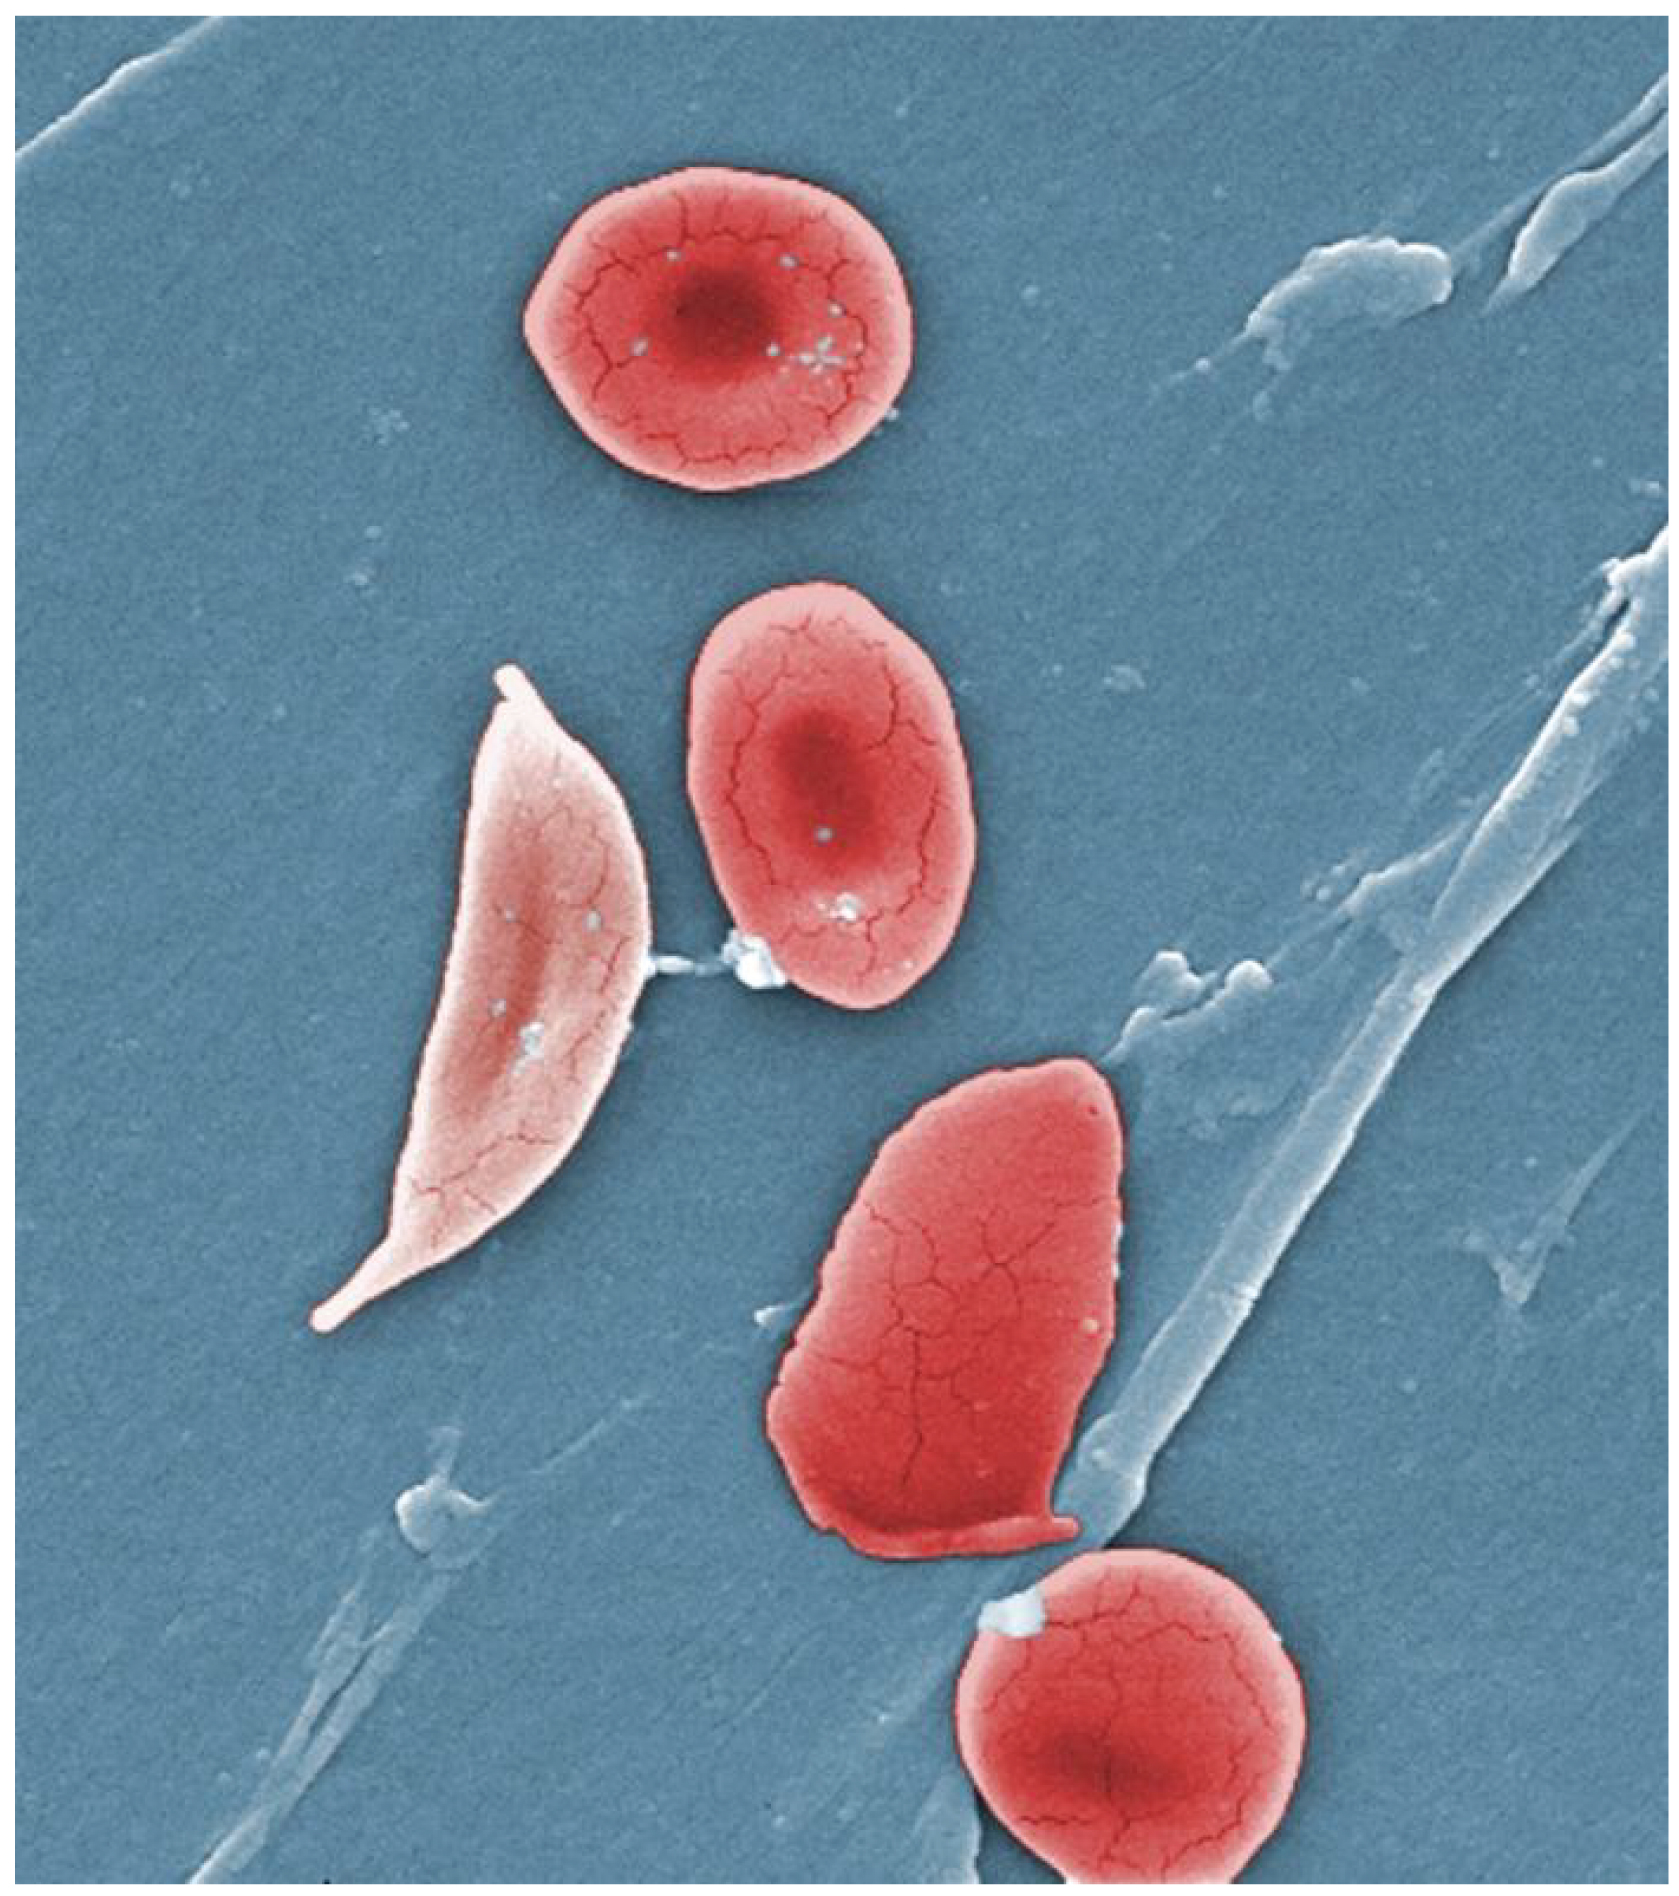 This photograph shows red blood cells of a person suffering from sickle cell anemia. Instead of being discoid shaped like healthy blood cells, sickle red blood cells are shaped like a sickle.